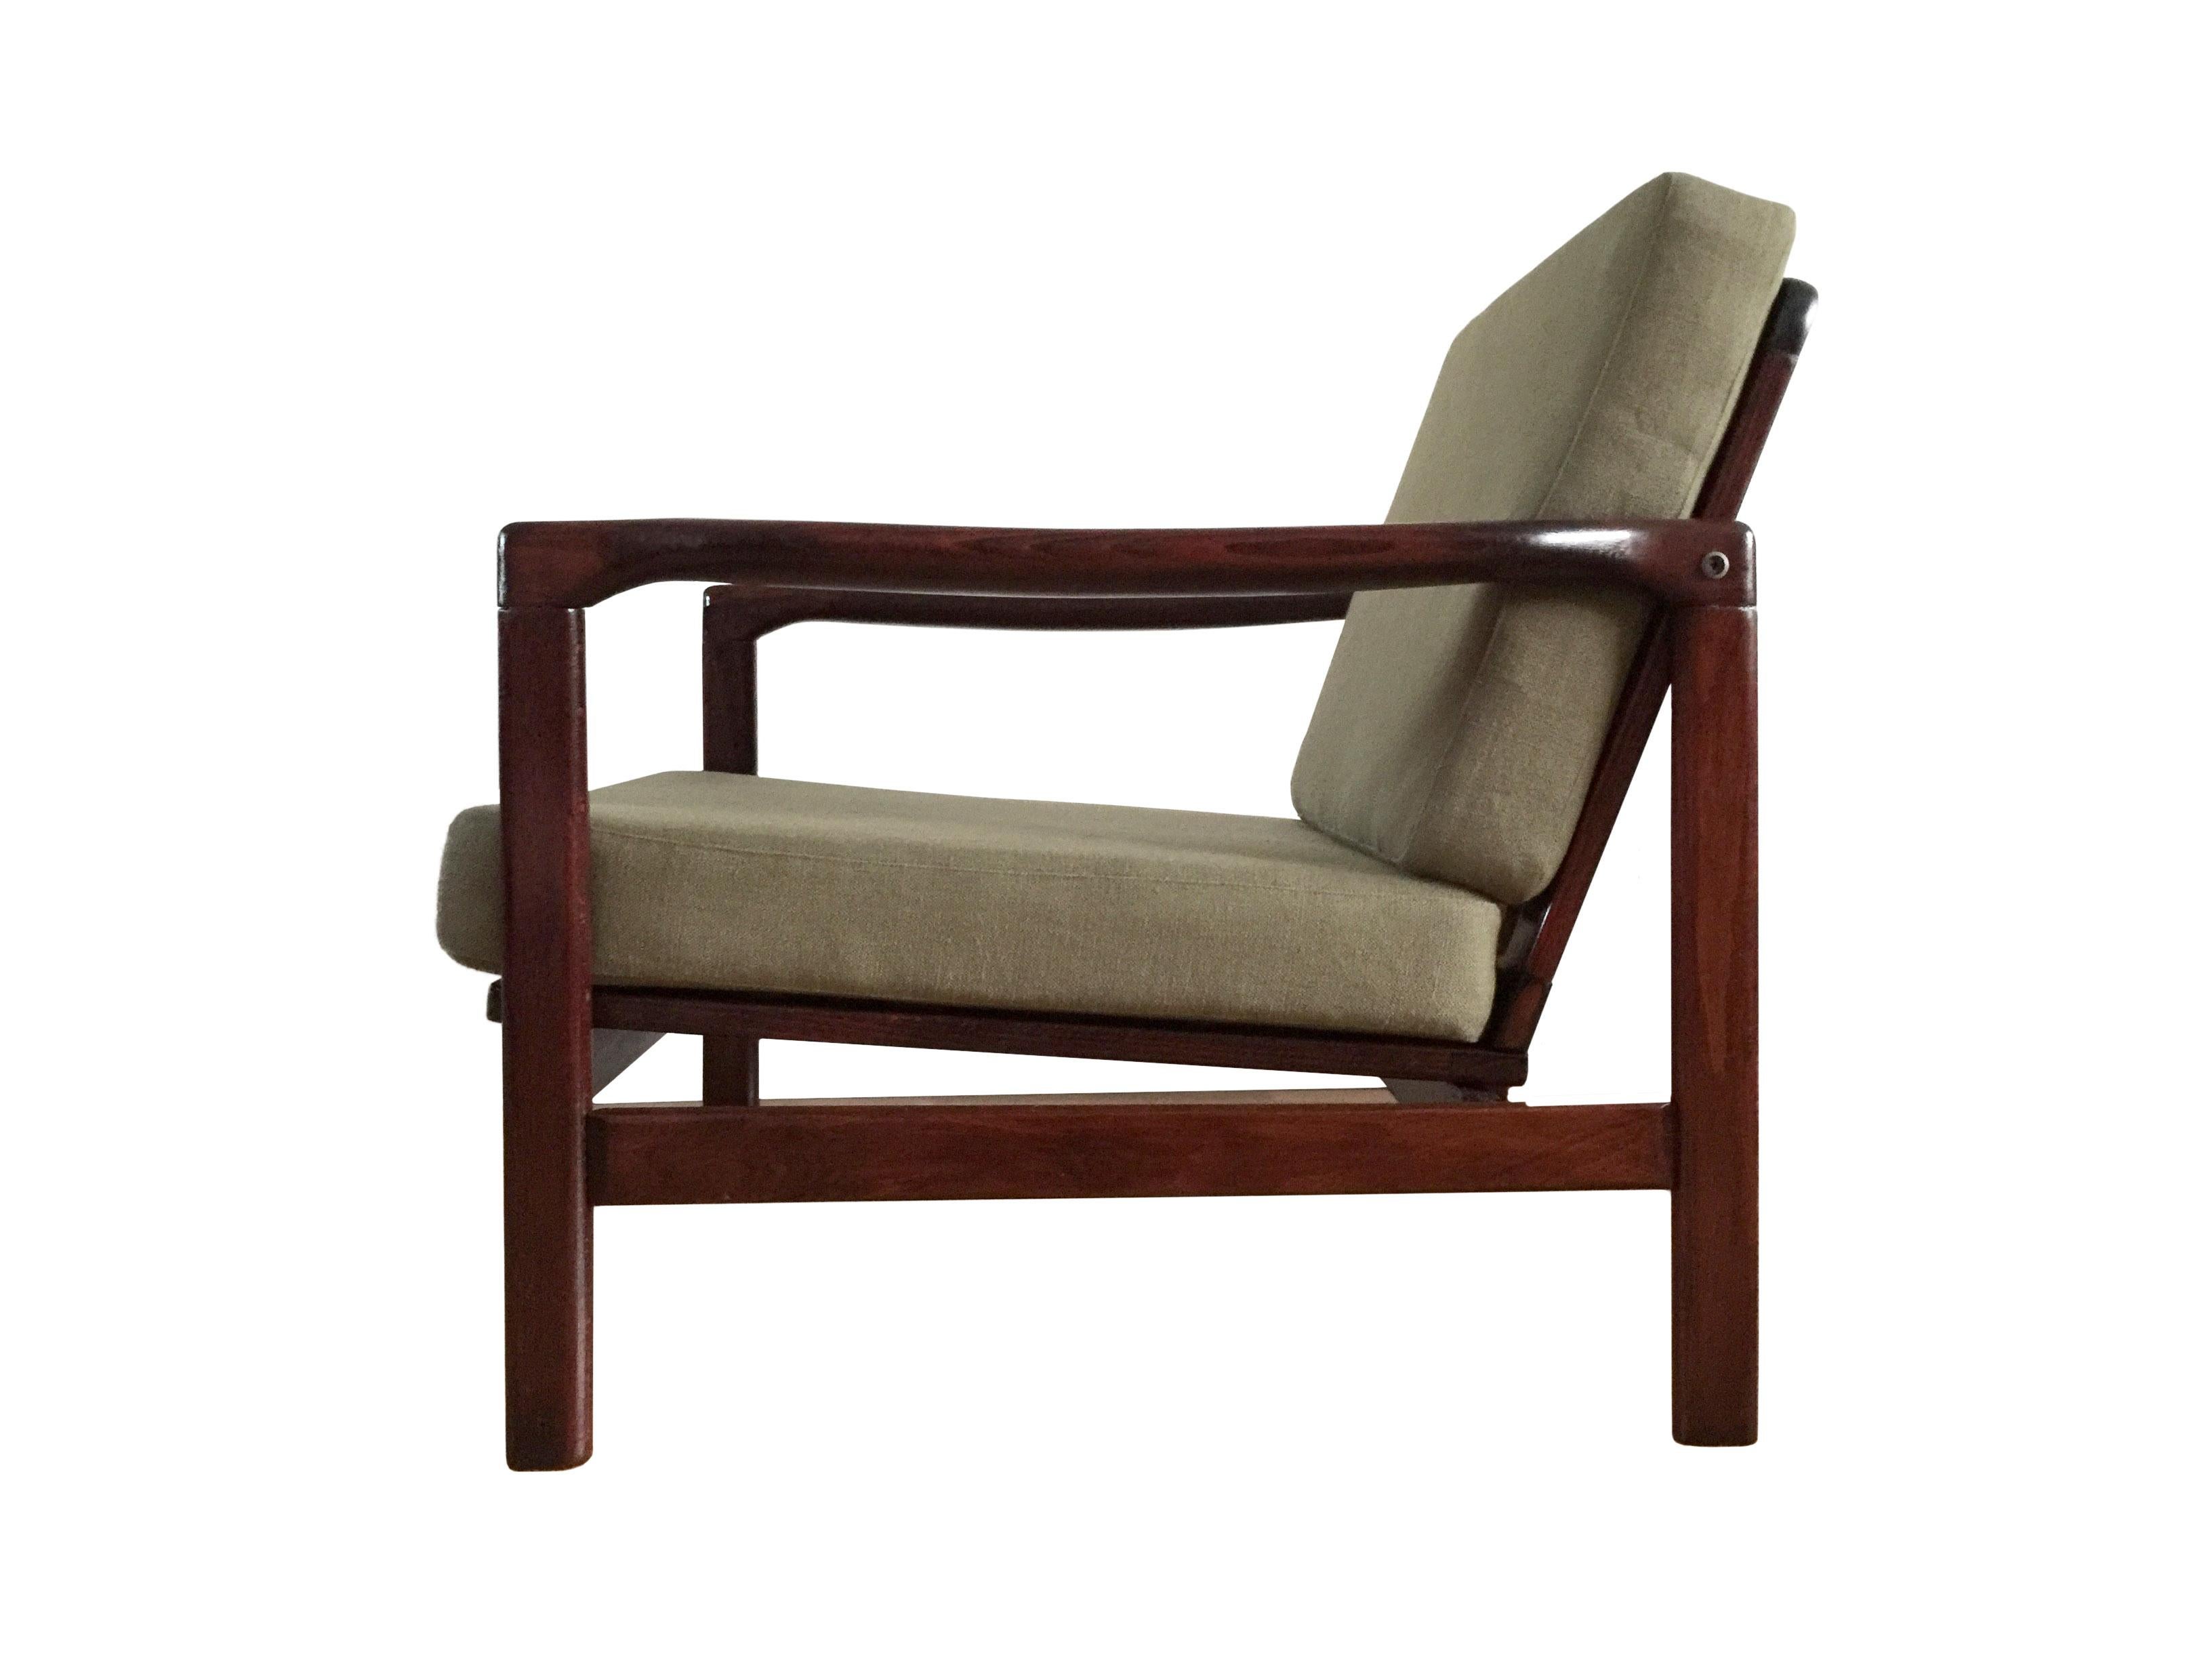 Polish Midcentury Lounge Armchairs Set in Olive Linen, Zenon Bączyk, 1960s For Sale